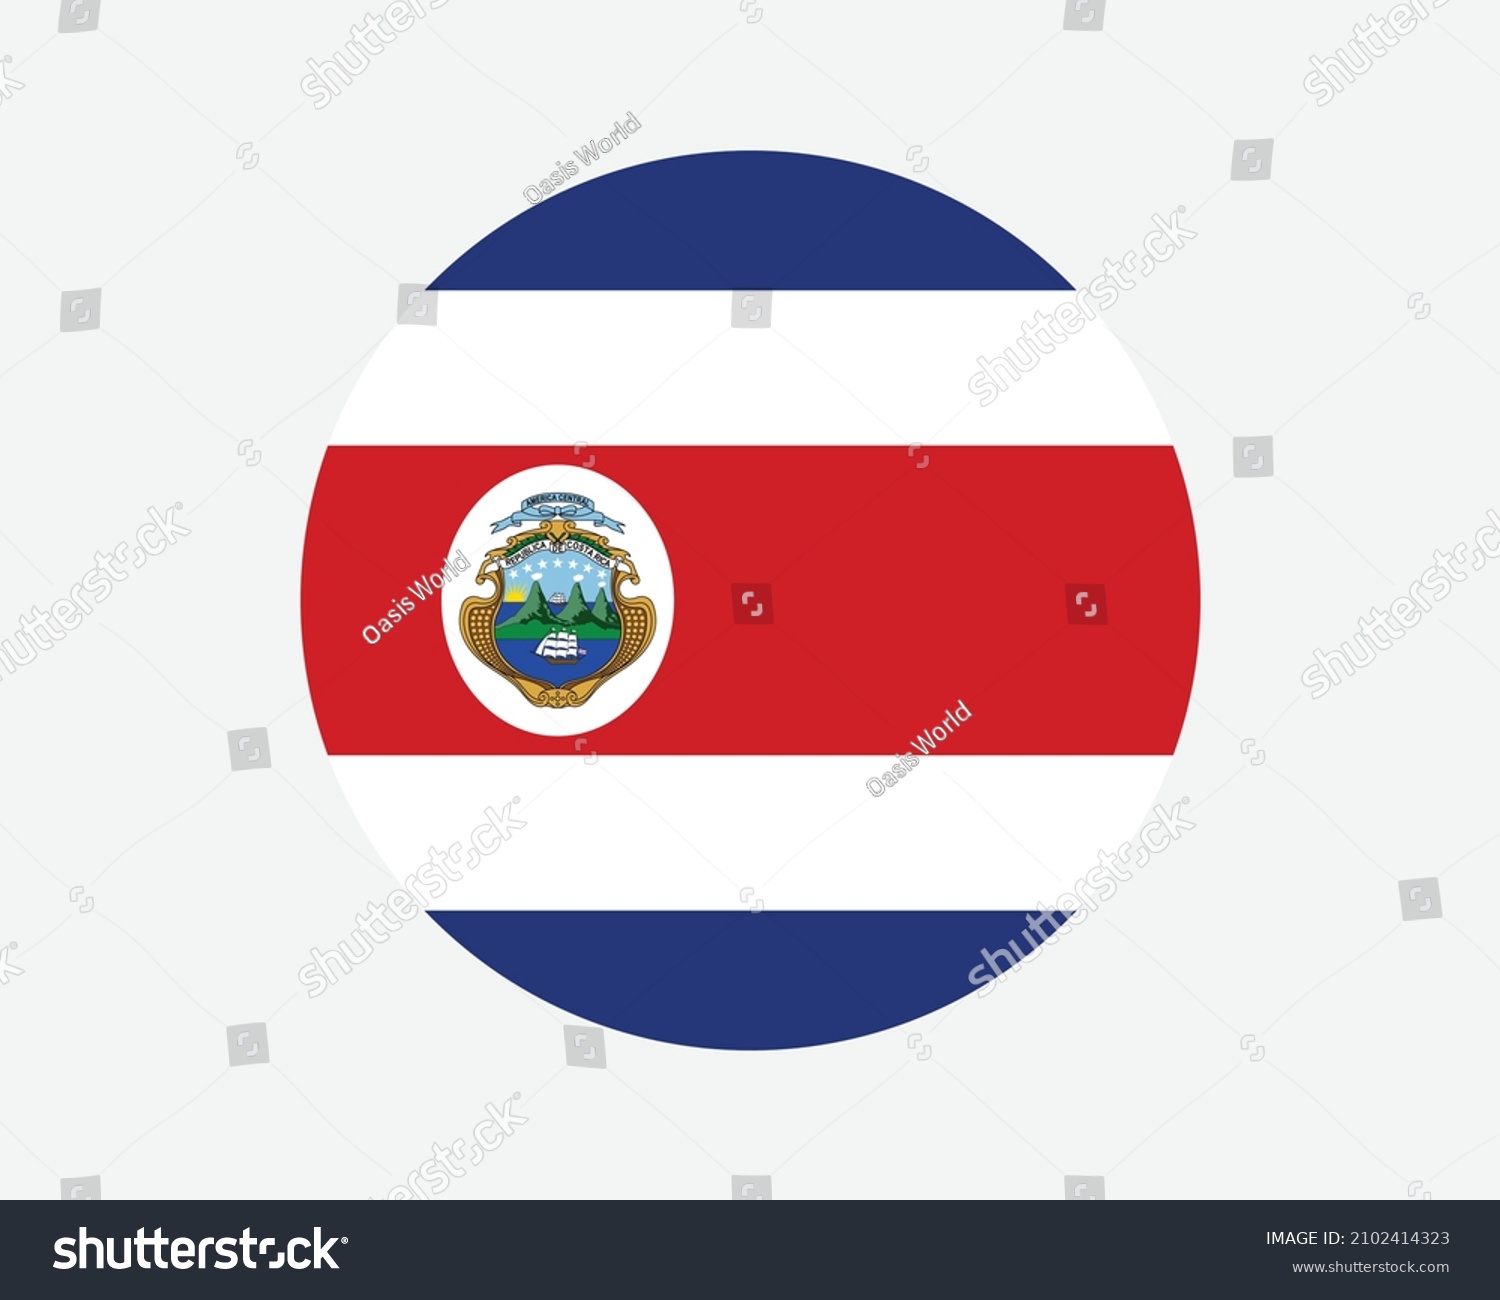 SVG of Costa Rica Round Country Flag. Circular Costa Rican National Flag. Republic of Costa Rica Circle Shape Button Banner. EPS Vector Illustration. svg